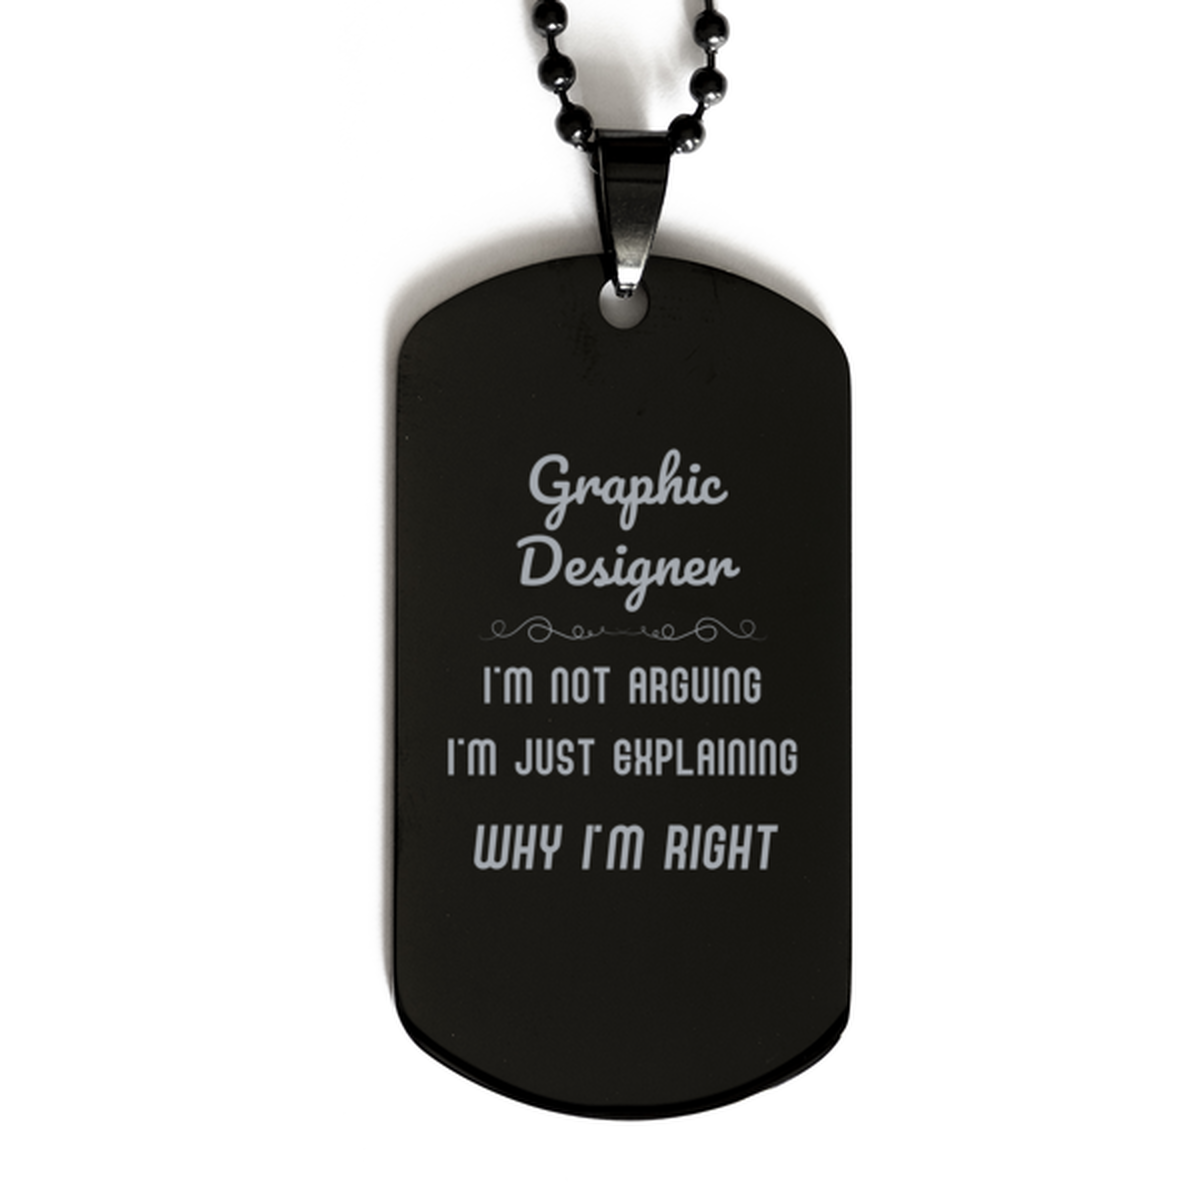 Graphic Designer I'm not Arguing. I'm Just Explaining Why I'm RIGHT Black Dog Tag, Funny Saying Quote Graphic Designer Gifts For Graphic Designer Graduation Birthday Christmas Gifts for Men Women Coworker